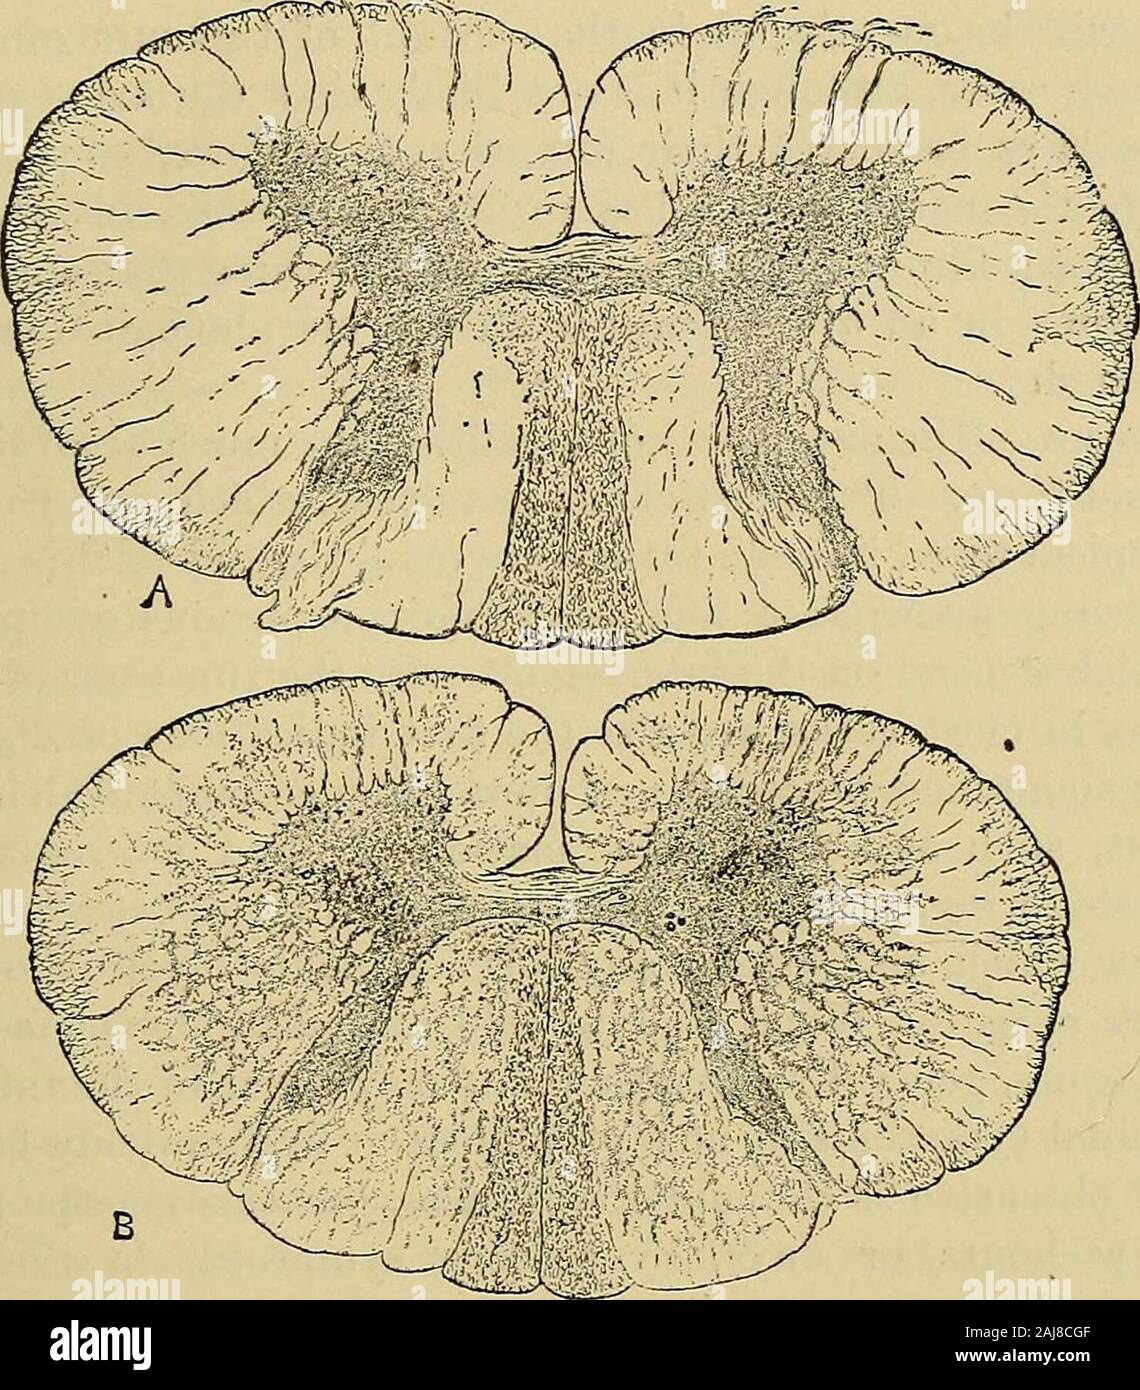 A manual of diseases of the nervous system . fibres are smaller than anymet with in the normal cord. The appearance is as if there hadbeen an irregular ascending myelitis, which had extended up thecord as high as between the seventh and eighth cervical segments,and from the lower extremity of the normal fibres there had occurreda growth of new fibres such as effects the regeneration of nerves.*We seem to have here an actual process of renewal of fibres that hadbeen destroyed by such inflammation as has caused the empty spacesin the vicinity. If this is a correct interpretation of the appearanc Stock Photo